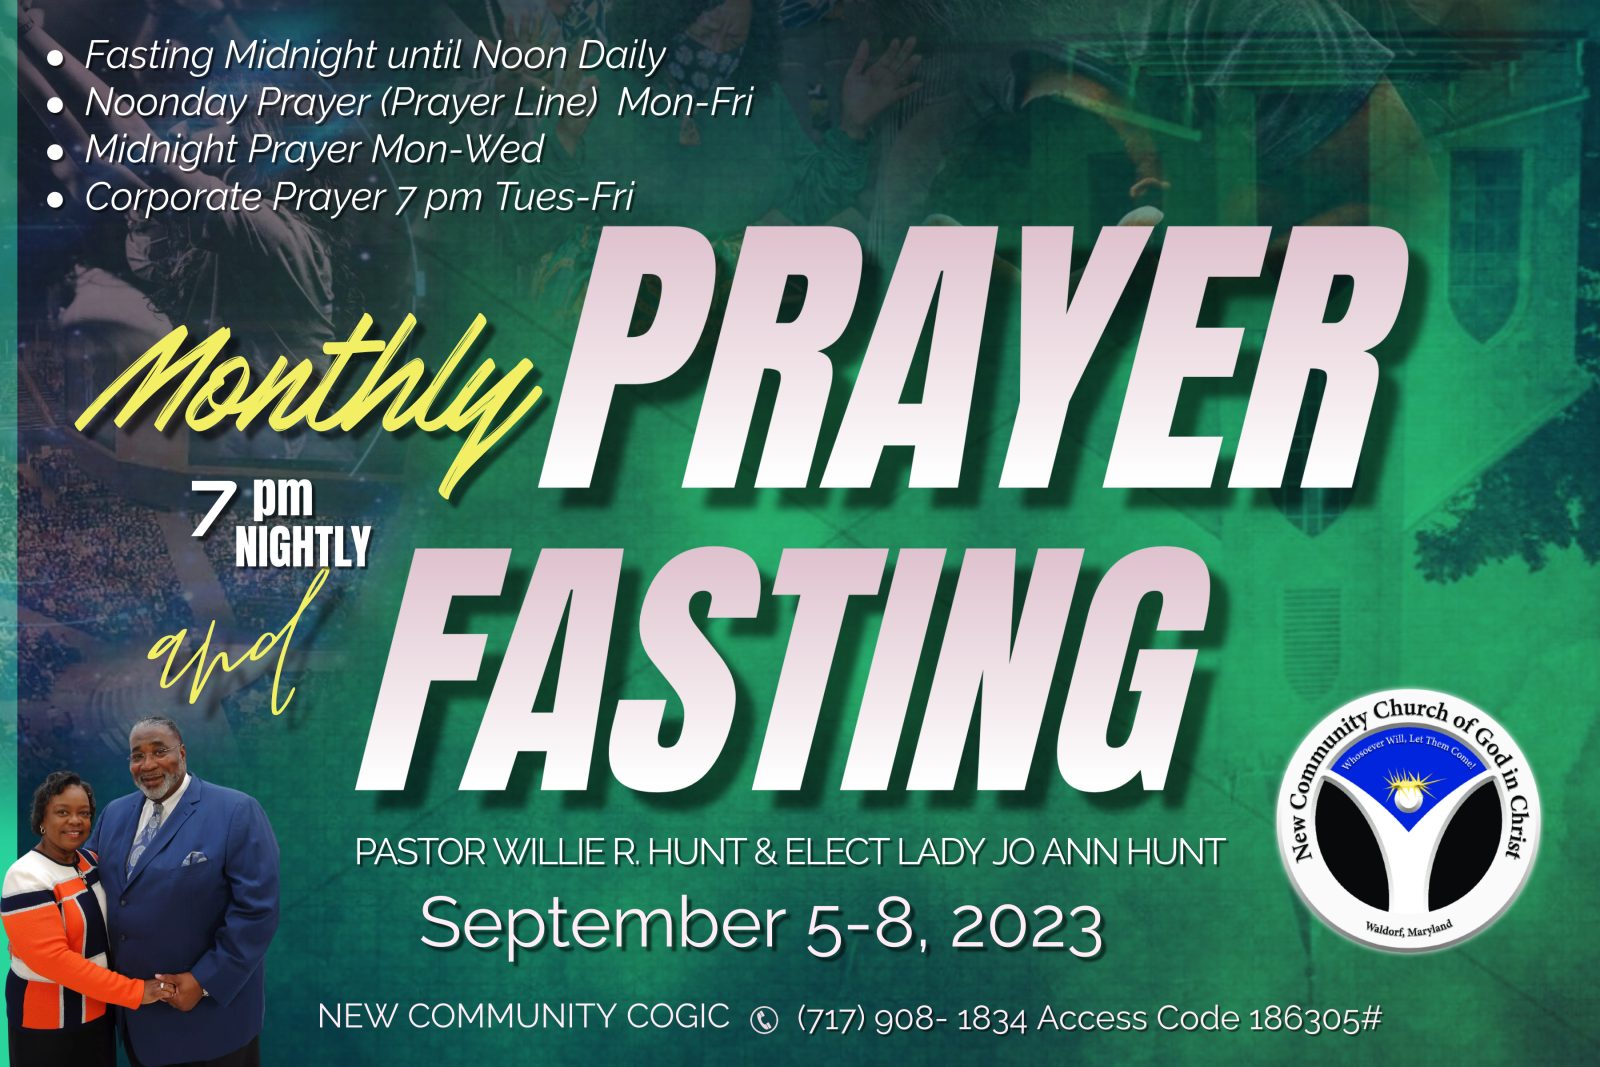 March Monthly Prayer and Fasting (38)